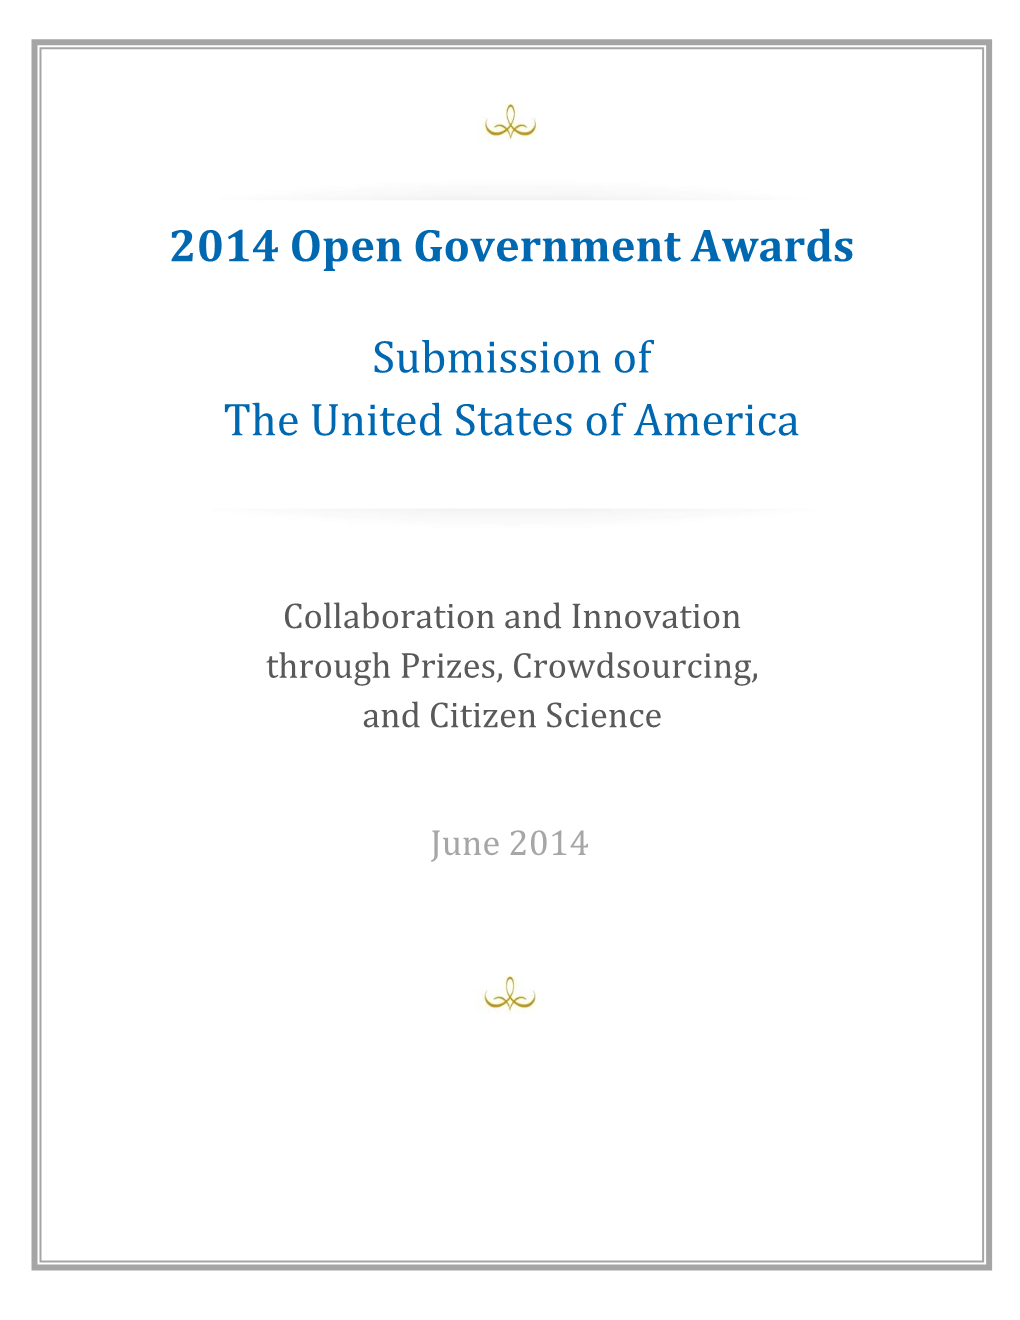 2014 Open Government Awards Submission of the United States Of